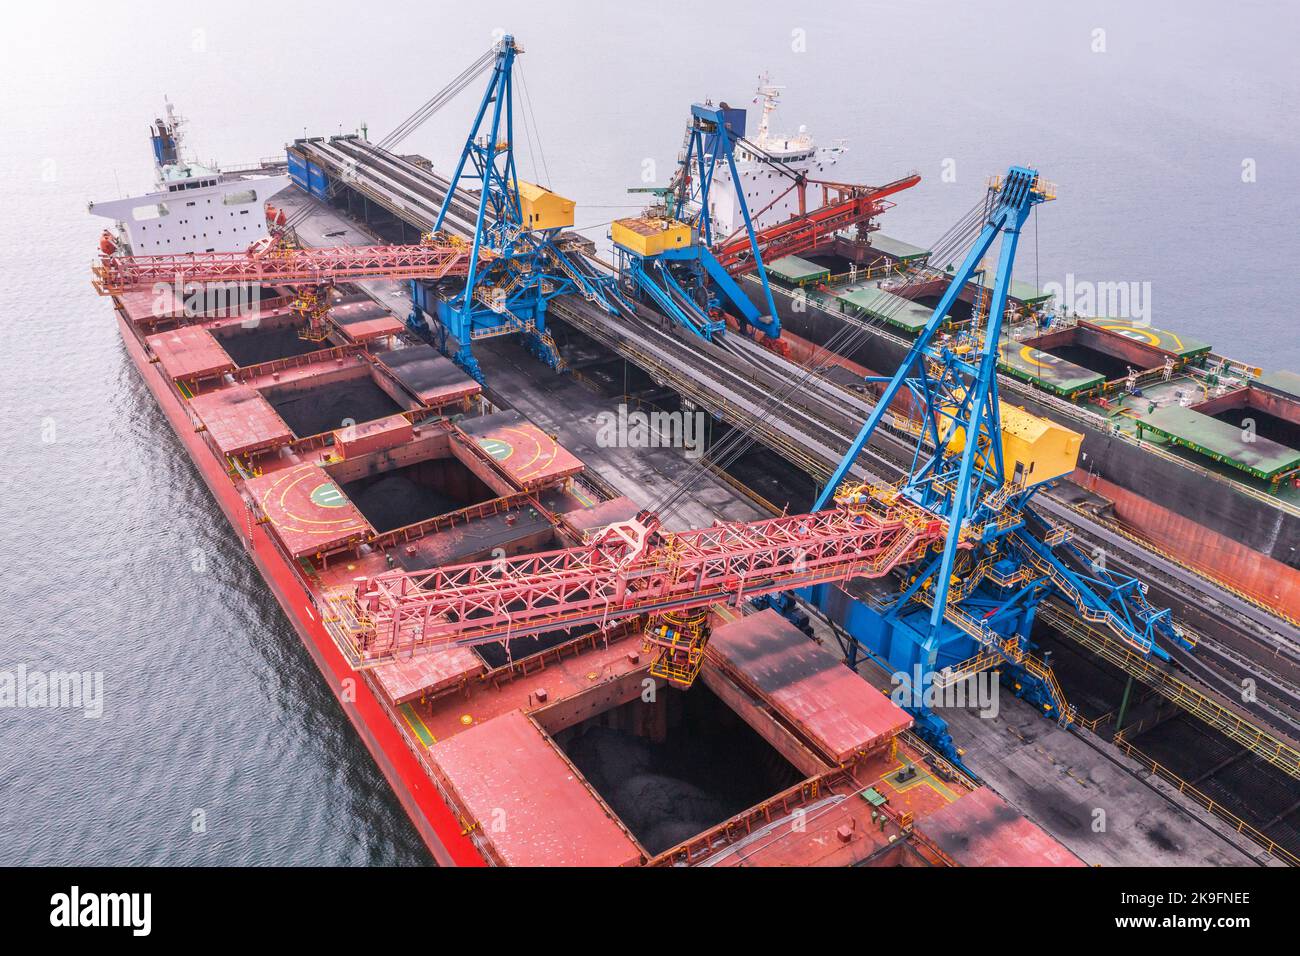 Mooring with ship and technics for an overload of loose cargoes. Stock Photo